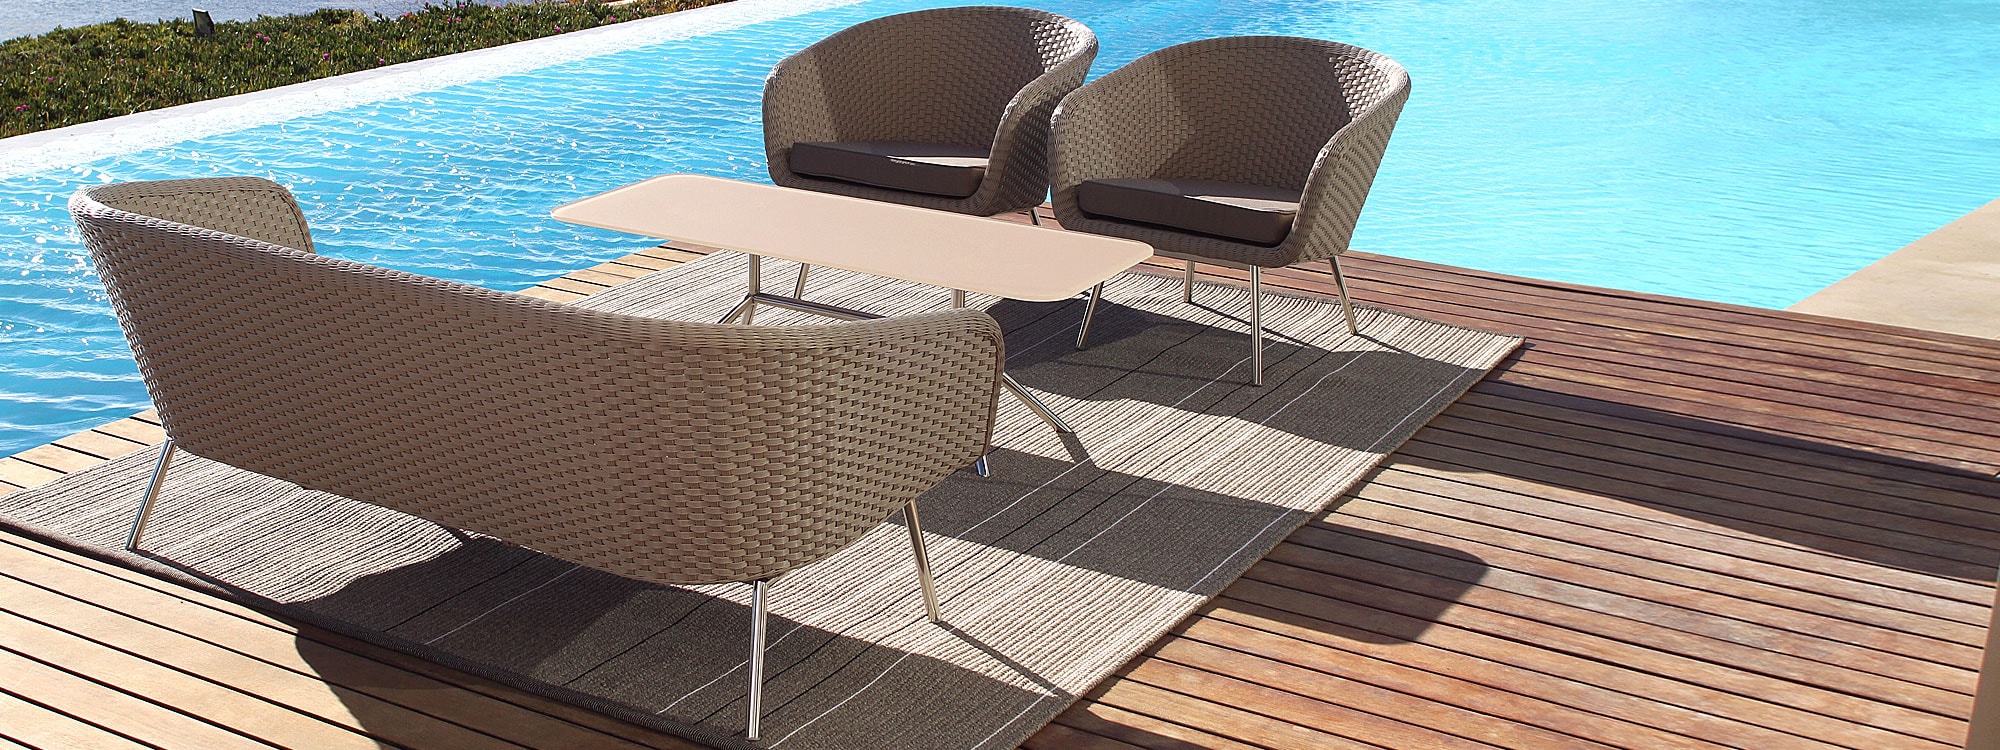 Image of Shell retro-inspired outdoor sofa and lounge chairs in taupe Batyline fibre and electro-polished stainless by FueraDentro, on wooden decking next to swimming pool